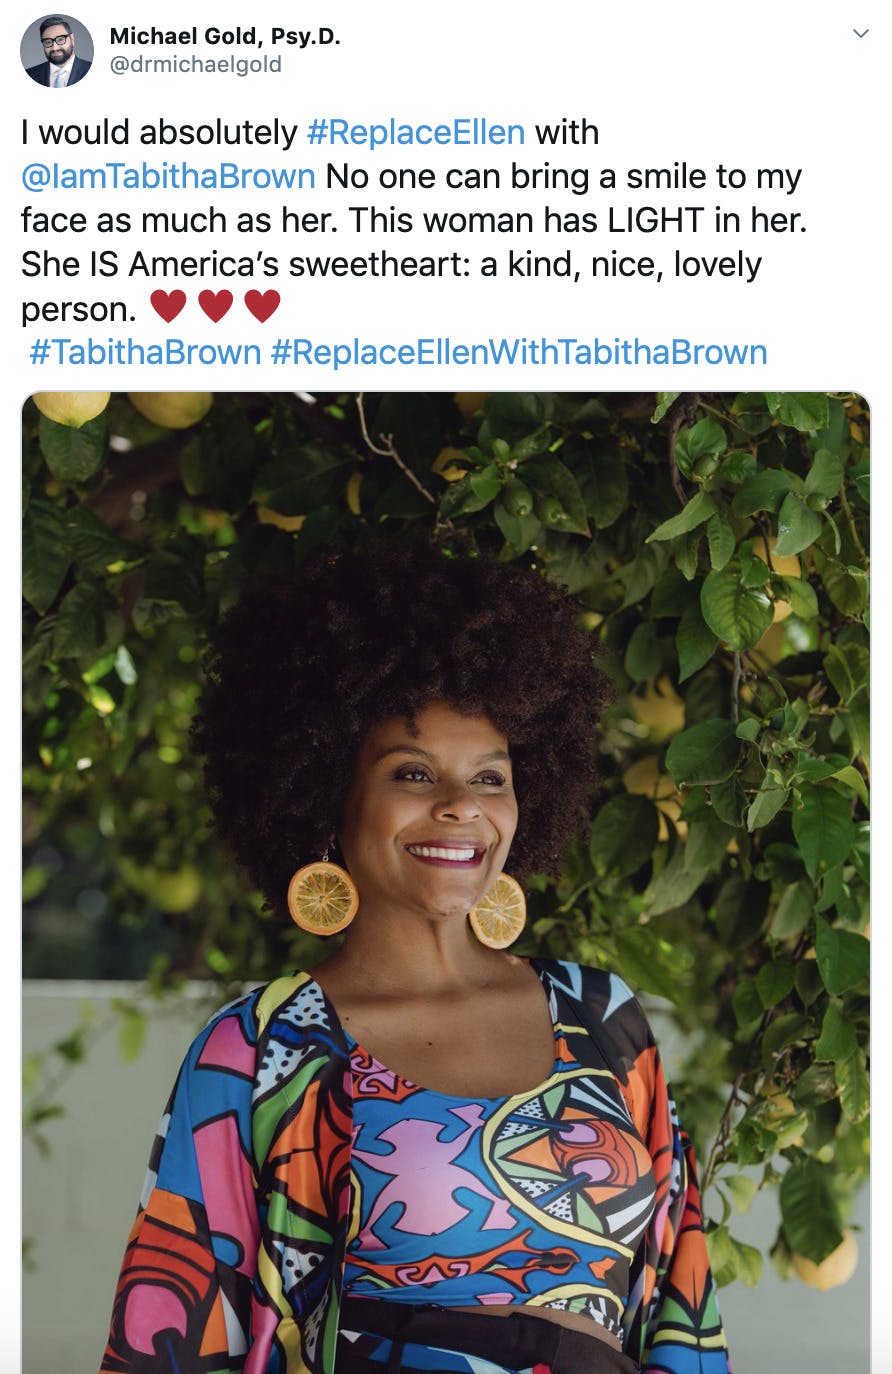 "I would absolutely #ReplaceEllen with  @IamTabithaBrown  No one can bring a smile to my face as much as her. This woman has LIGHT in her. She IS America’s sweetheart: a kind, nice, lovely person. ♥️♥️♥️ #TabithaBrown #ReplaceEllenWithTabithaBrown" image of Tabitha Brown smiling below a tree